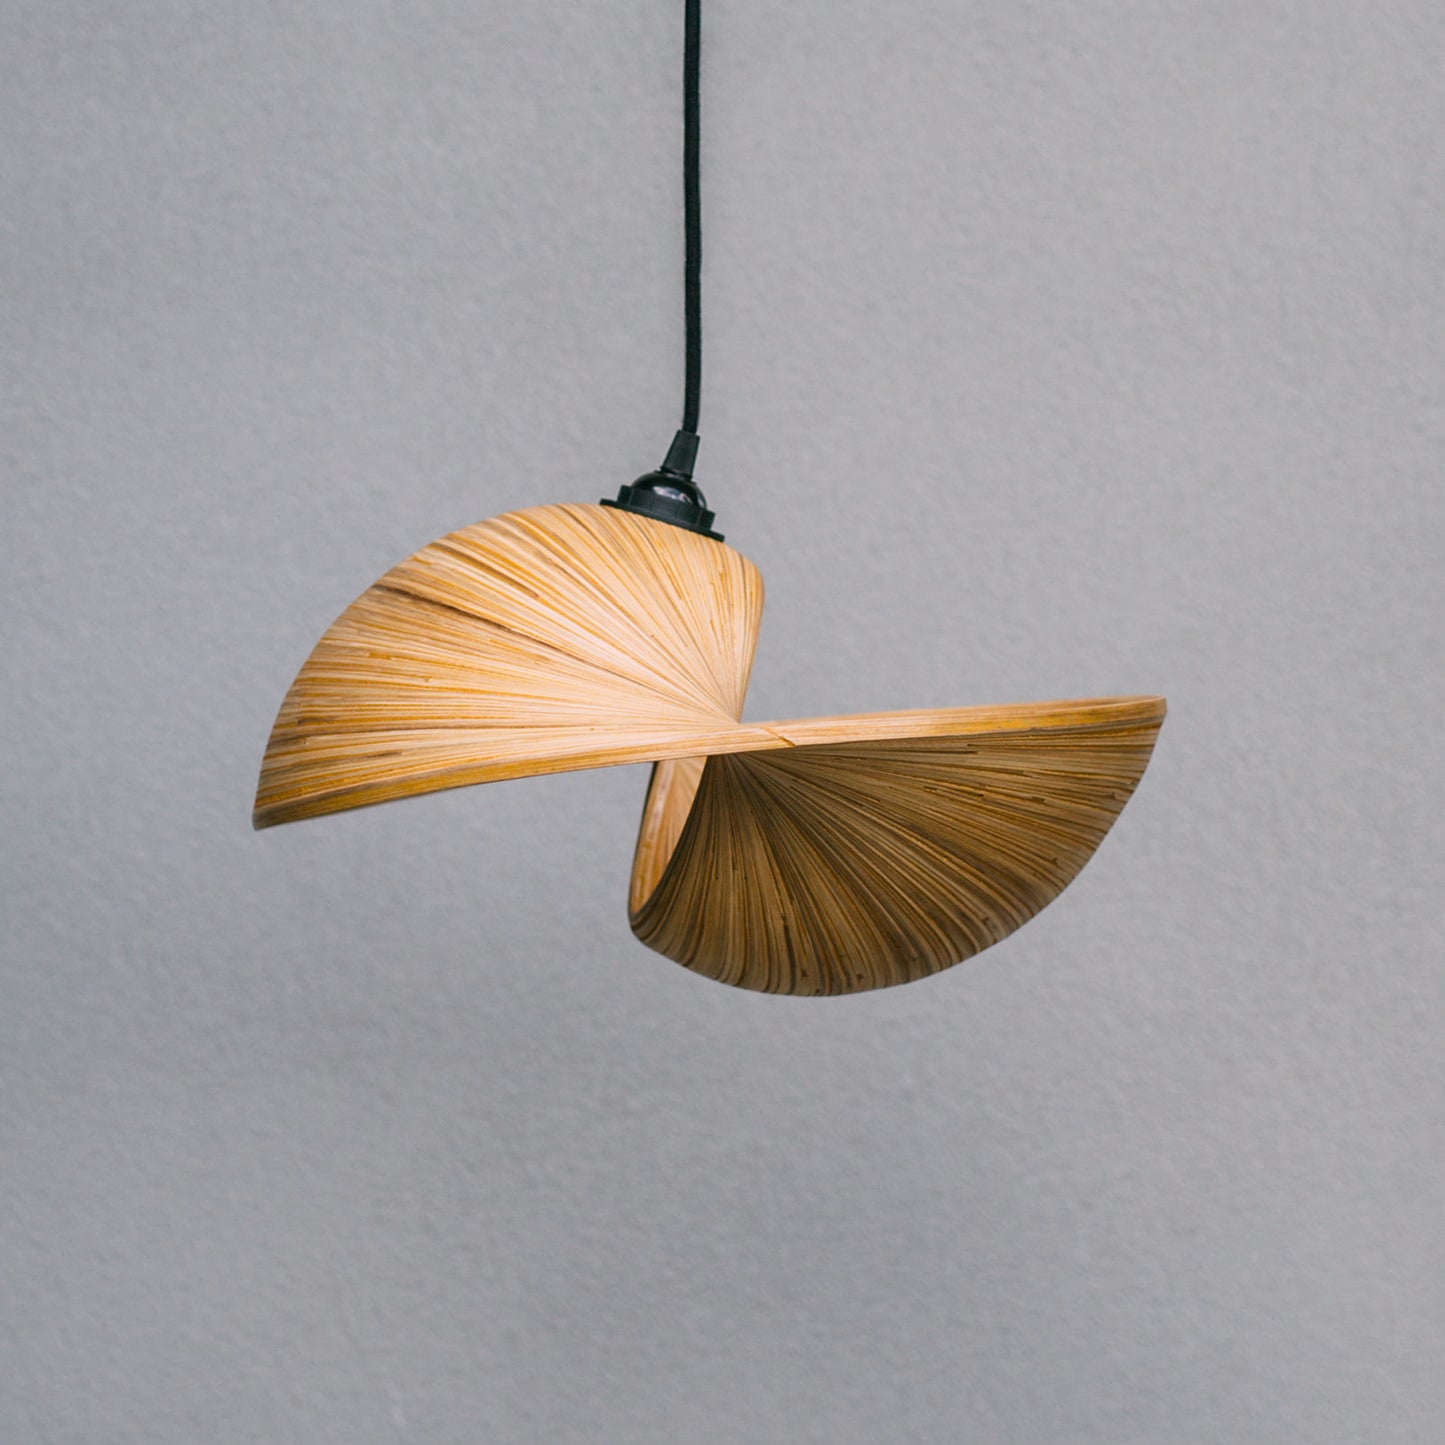 large-bamboo-pendant-light-shade-made-from-thin-strips-of-bamboo-to-look-like-a-shell